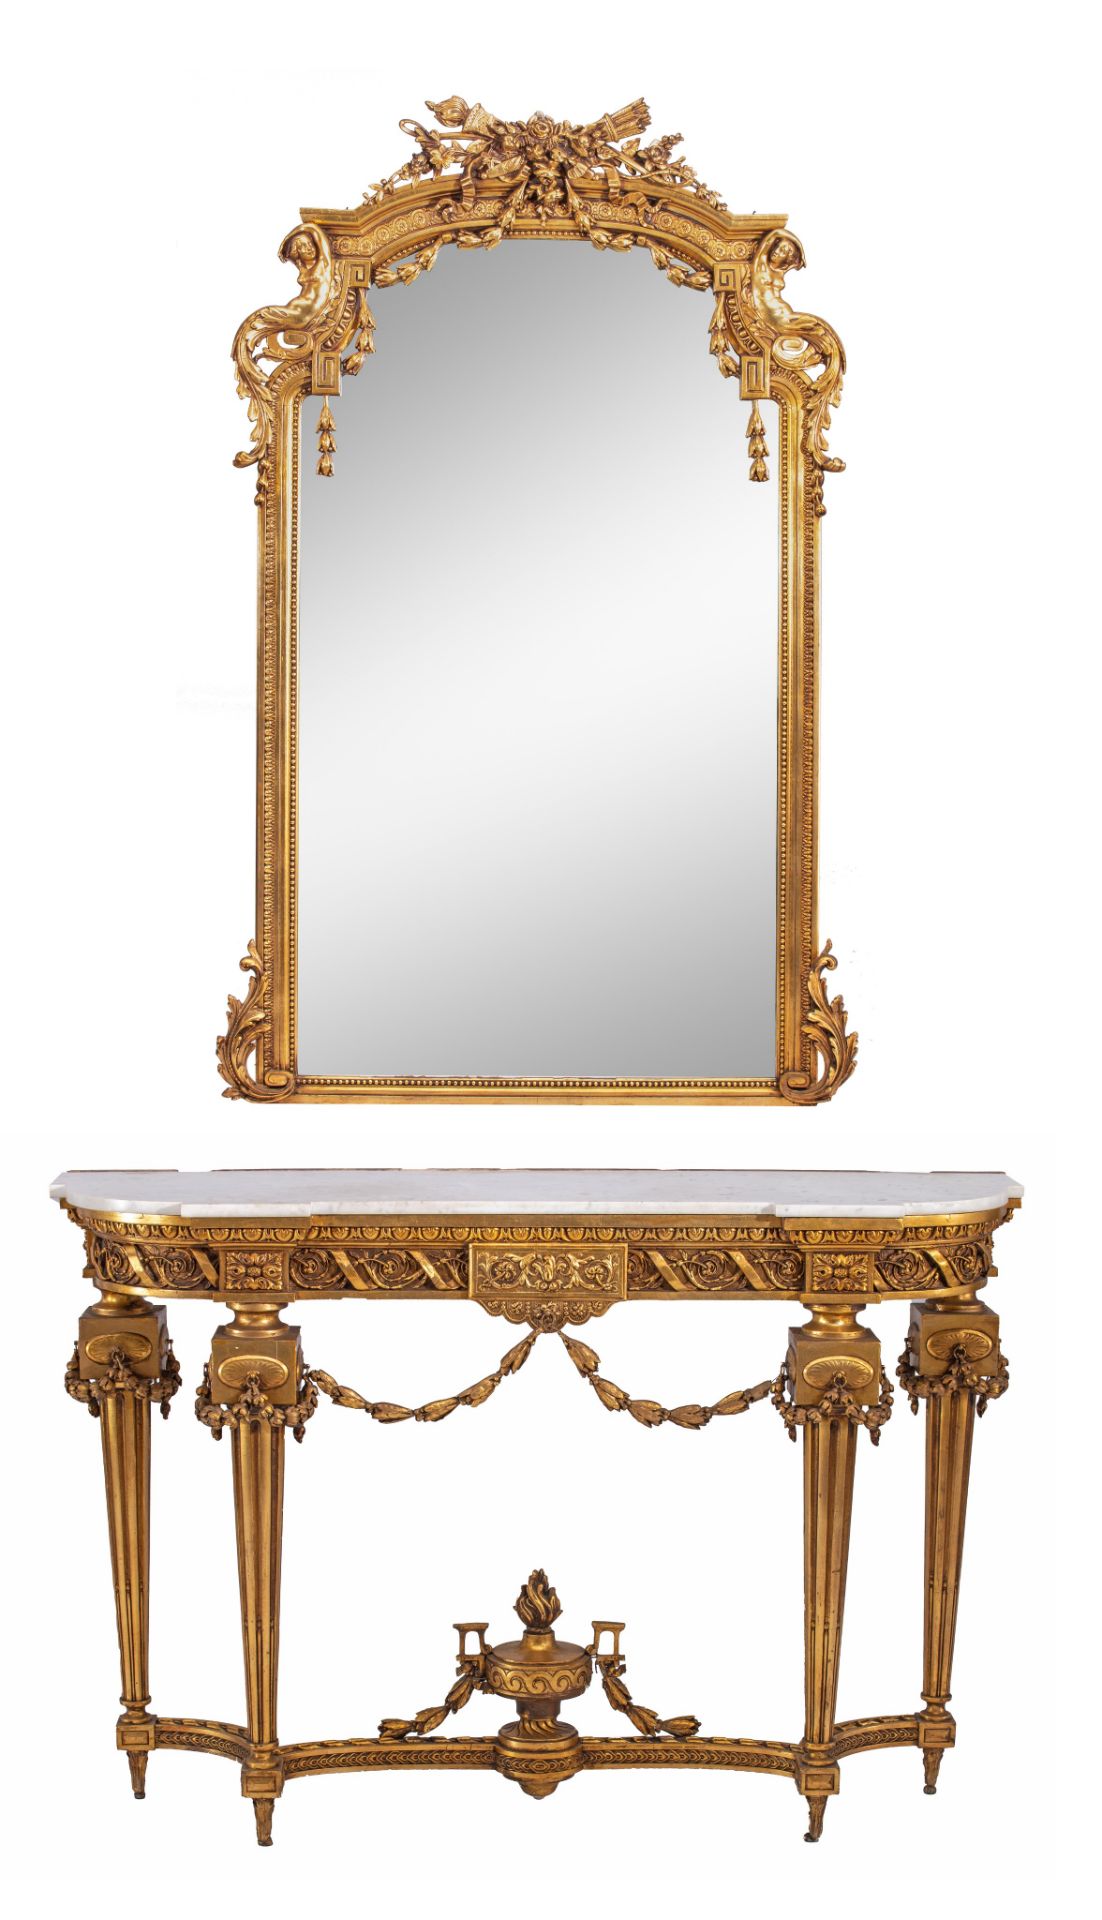 An imposing Neoclassical console table and matching wall mirror, H 92 - W 137 - D 40 - 116 x 191 cm